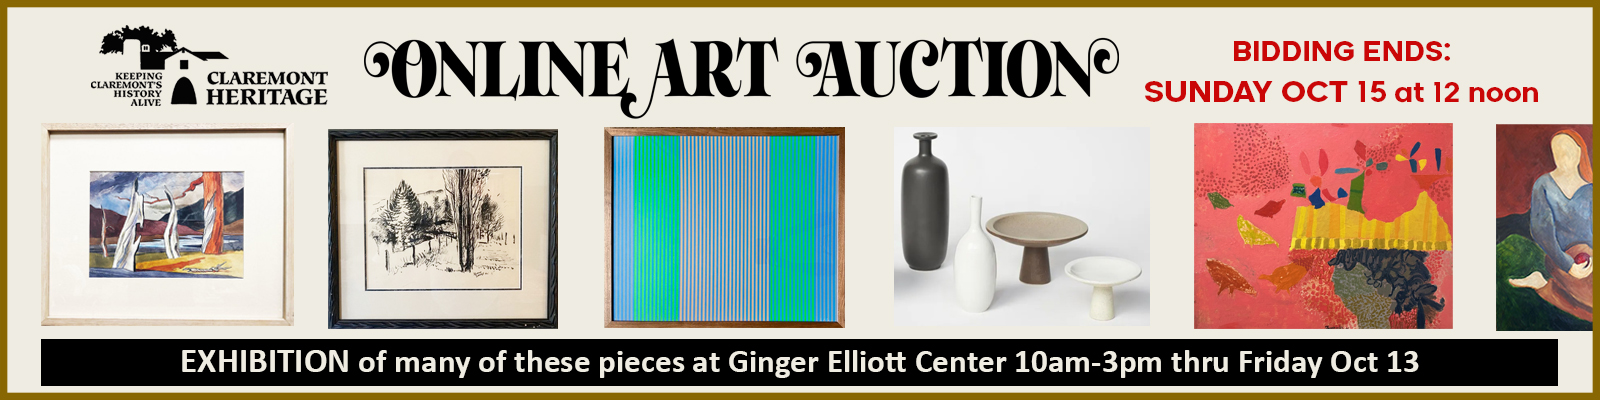 Bid on pieces of art by some of Claremont's notable artists!